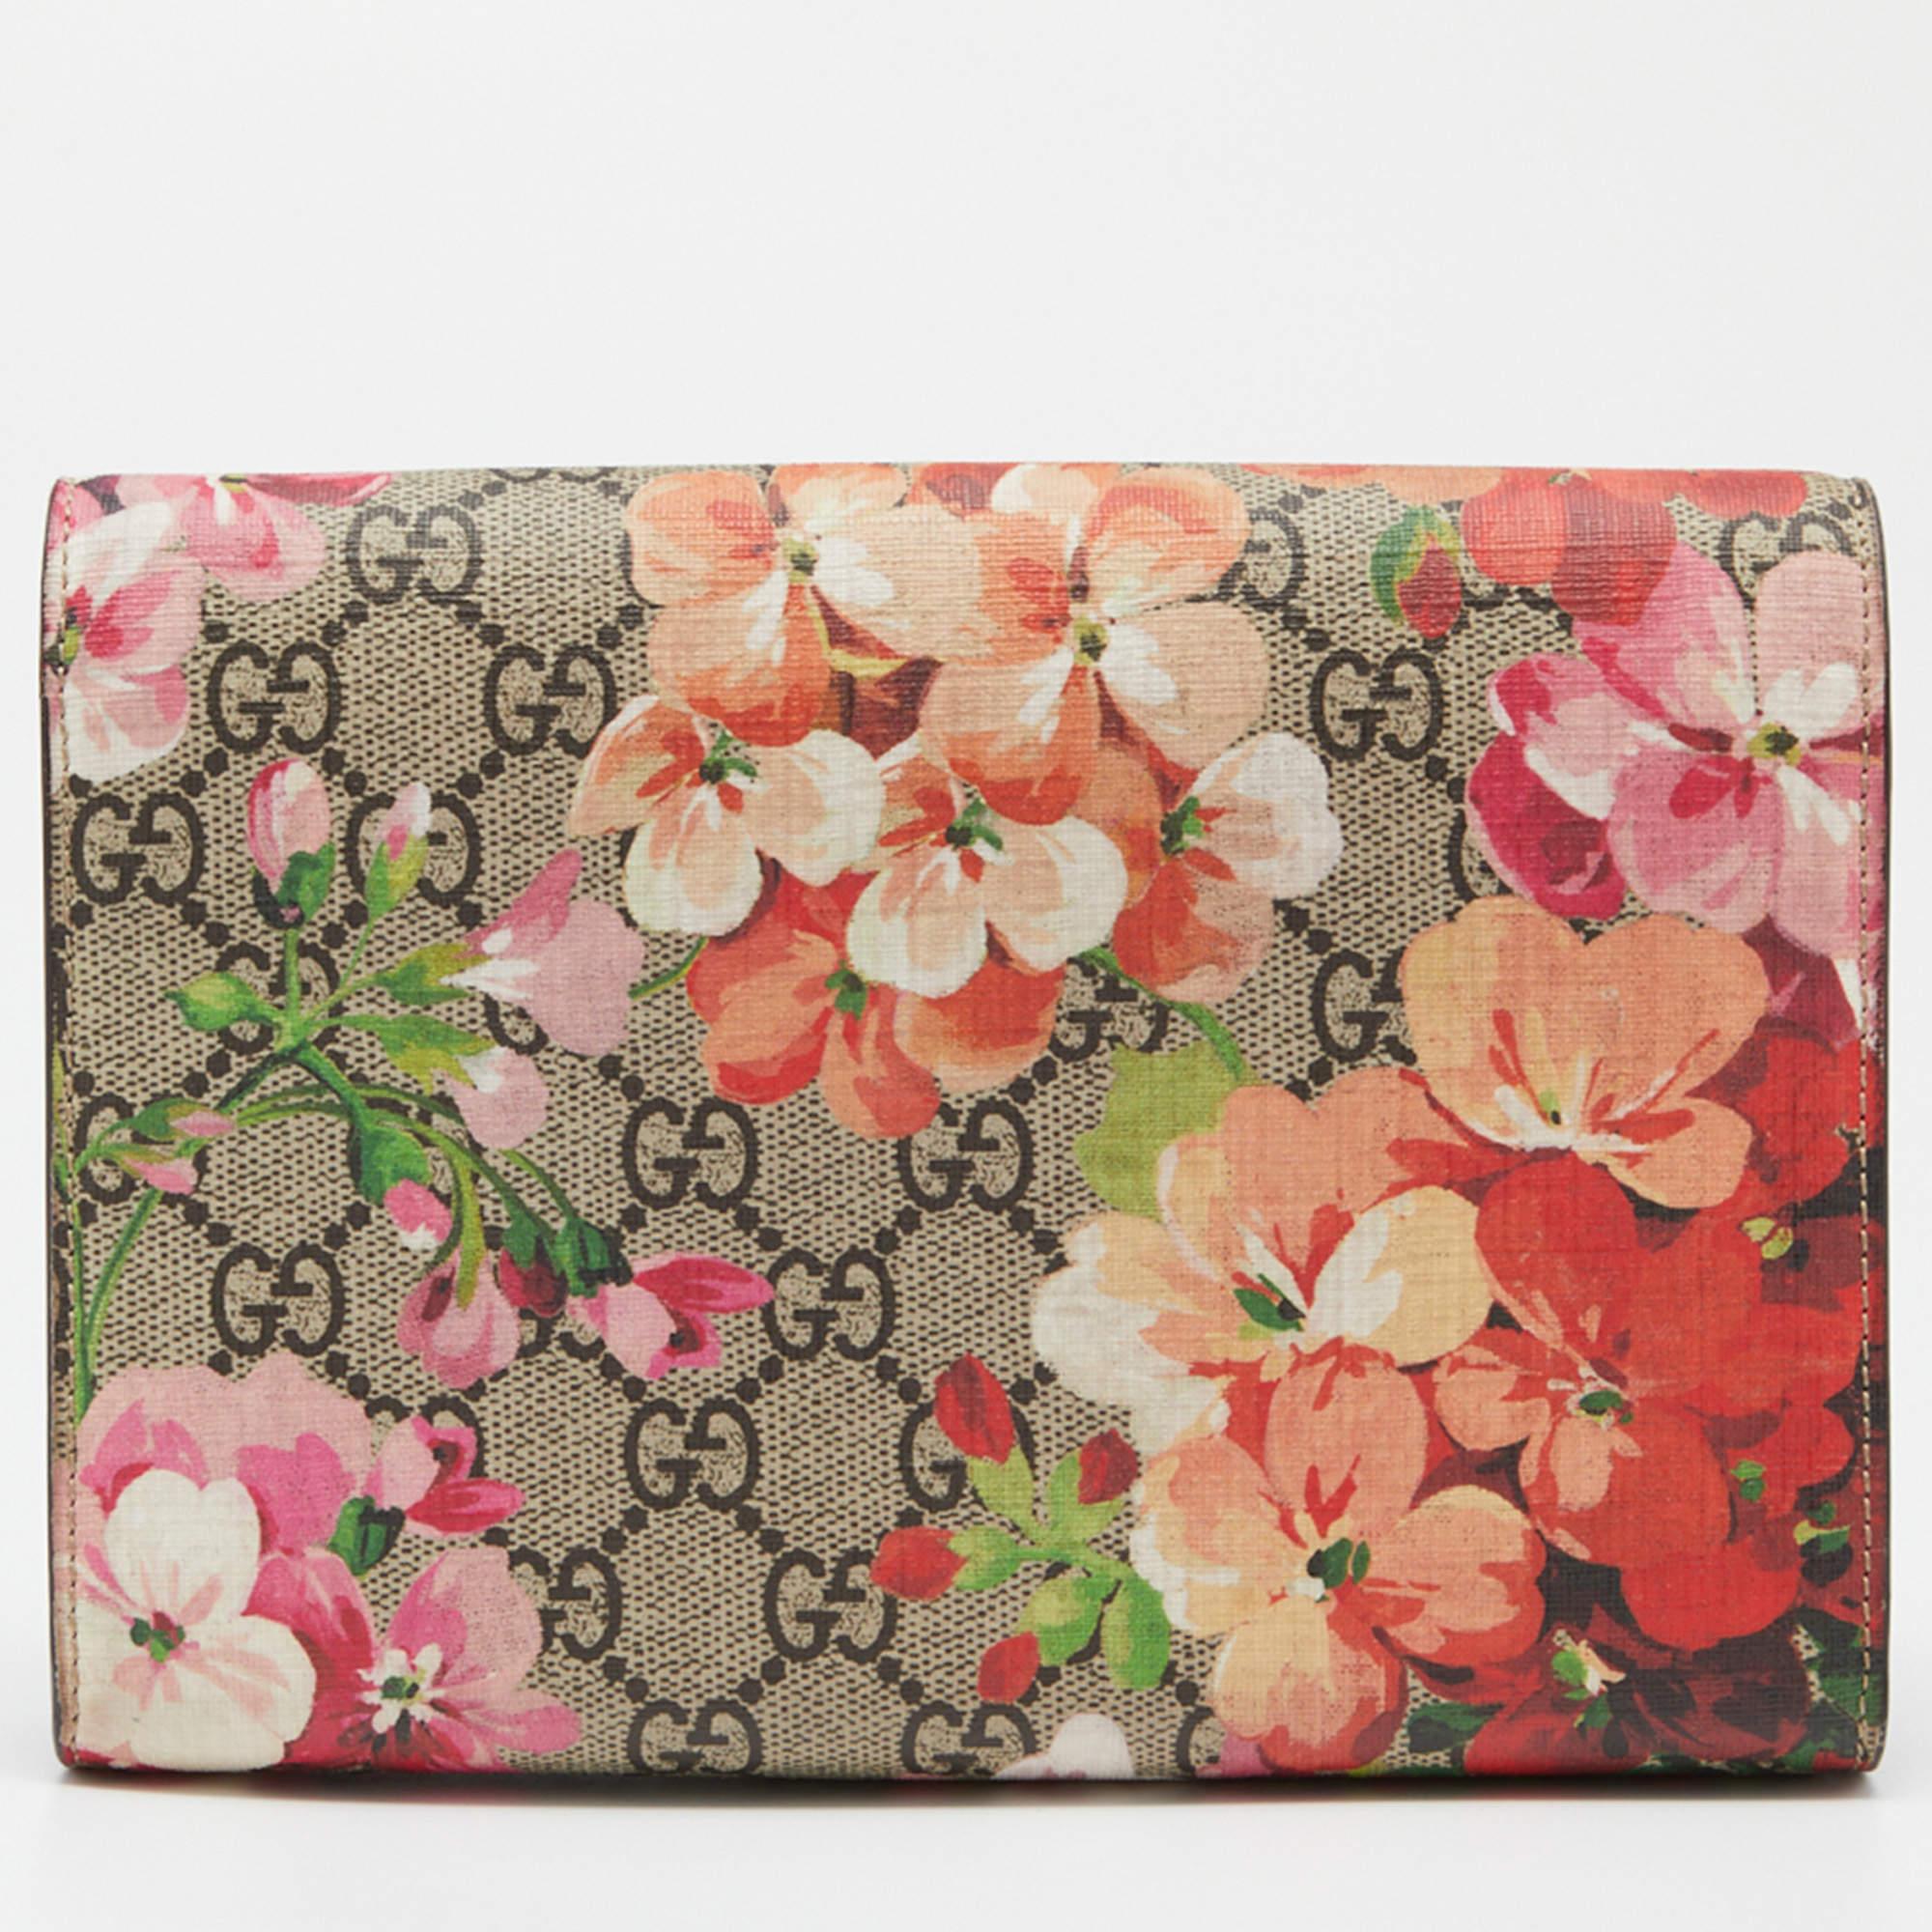 This Gucci Dionysus Wallet On Chain is beautifully crafted from Blooms-printed GG Supreme canvas and leather. The flap carries tiger heads with a reference to the Greek god Dionysus, and it secures a functional wallet-like interior.

Includes: